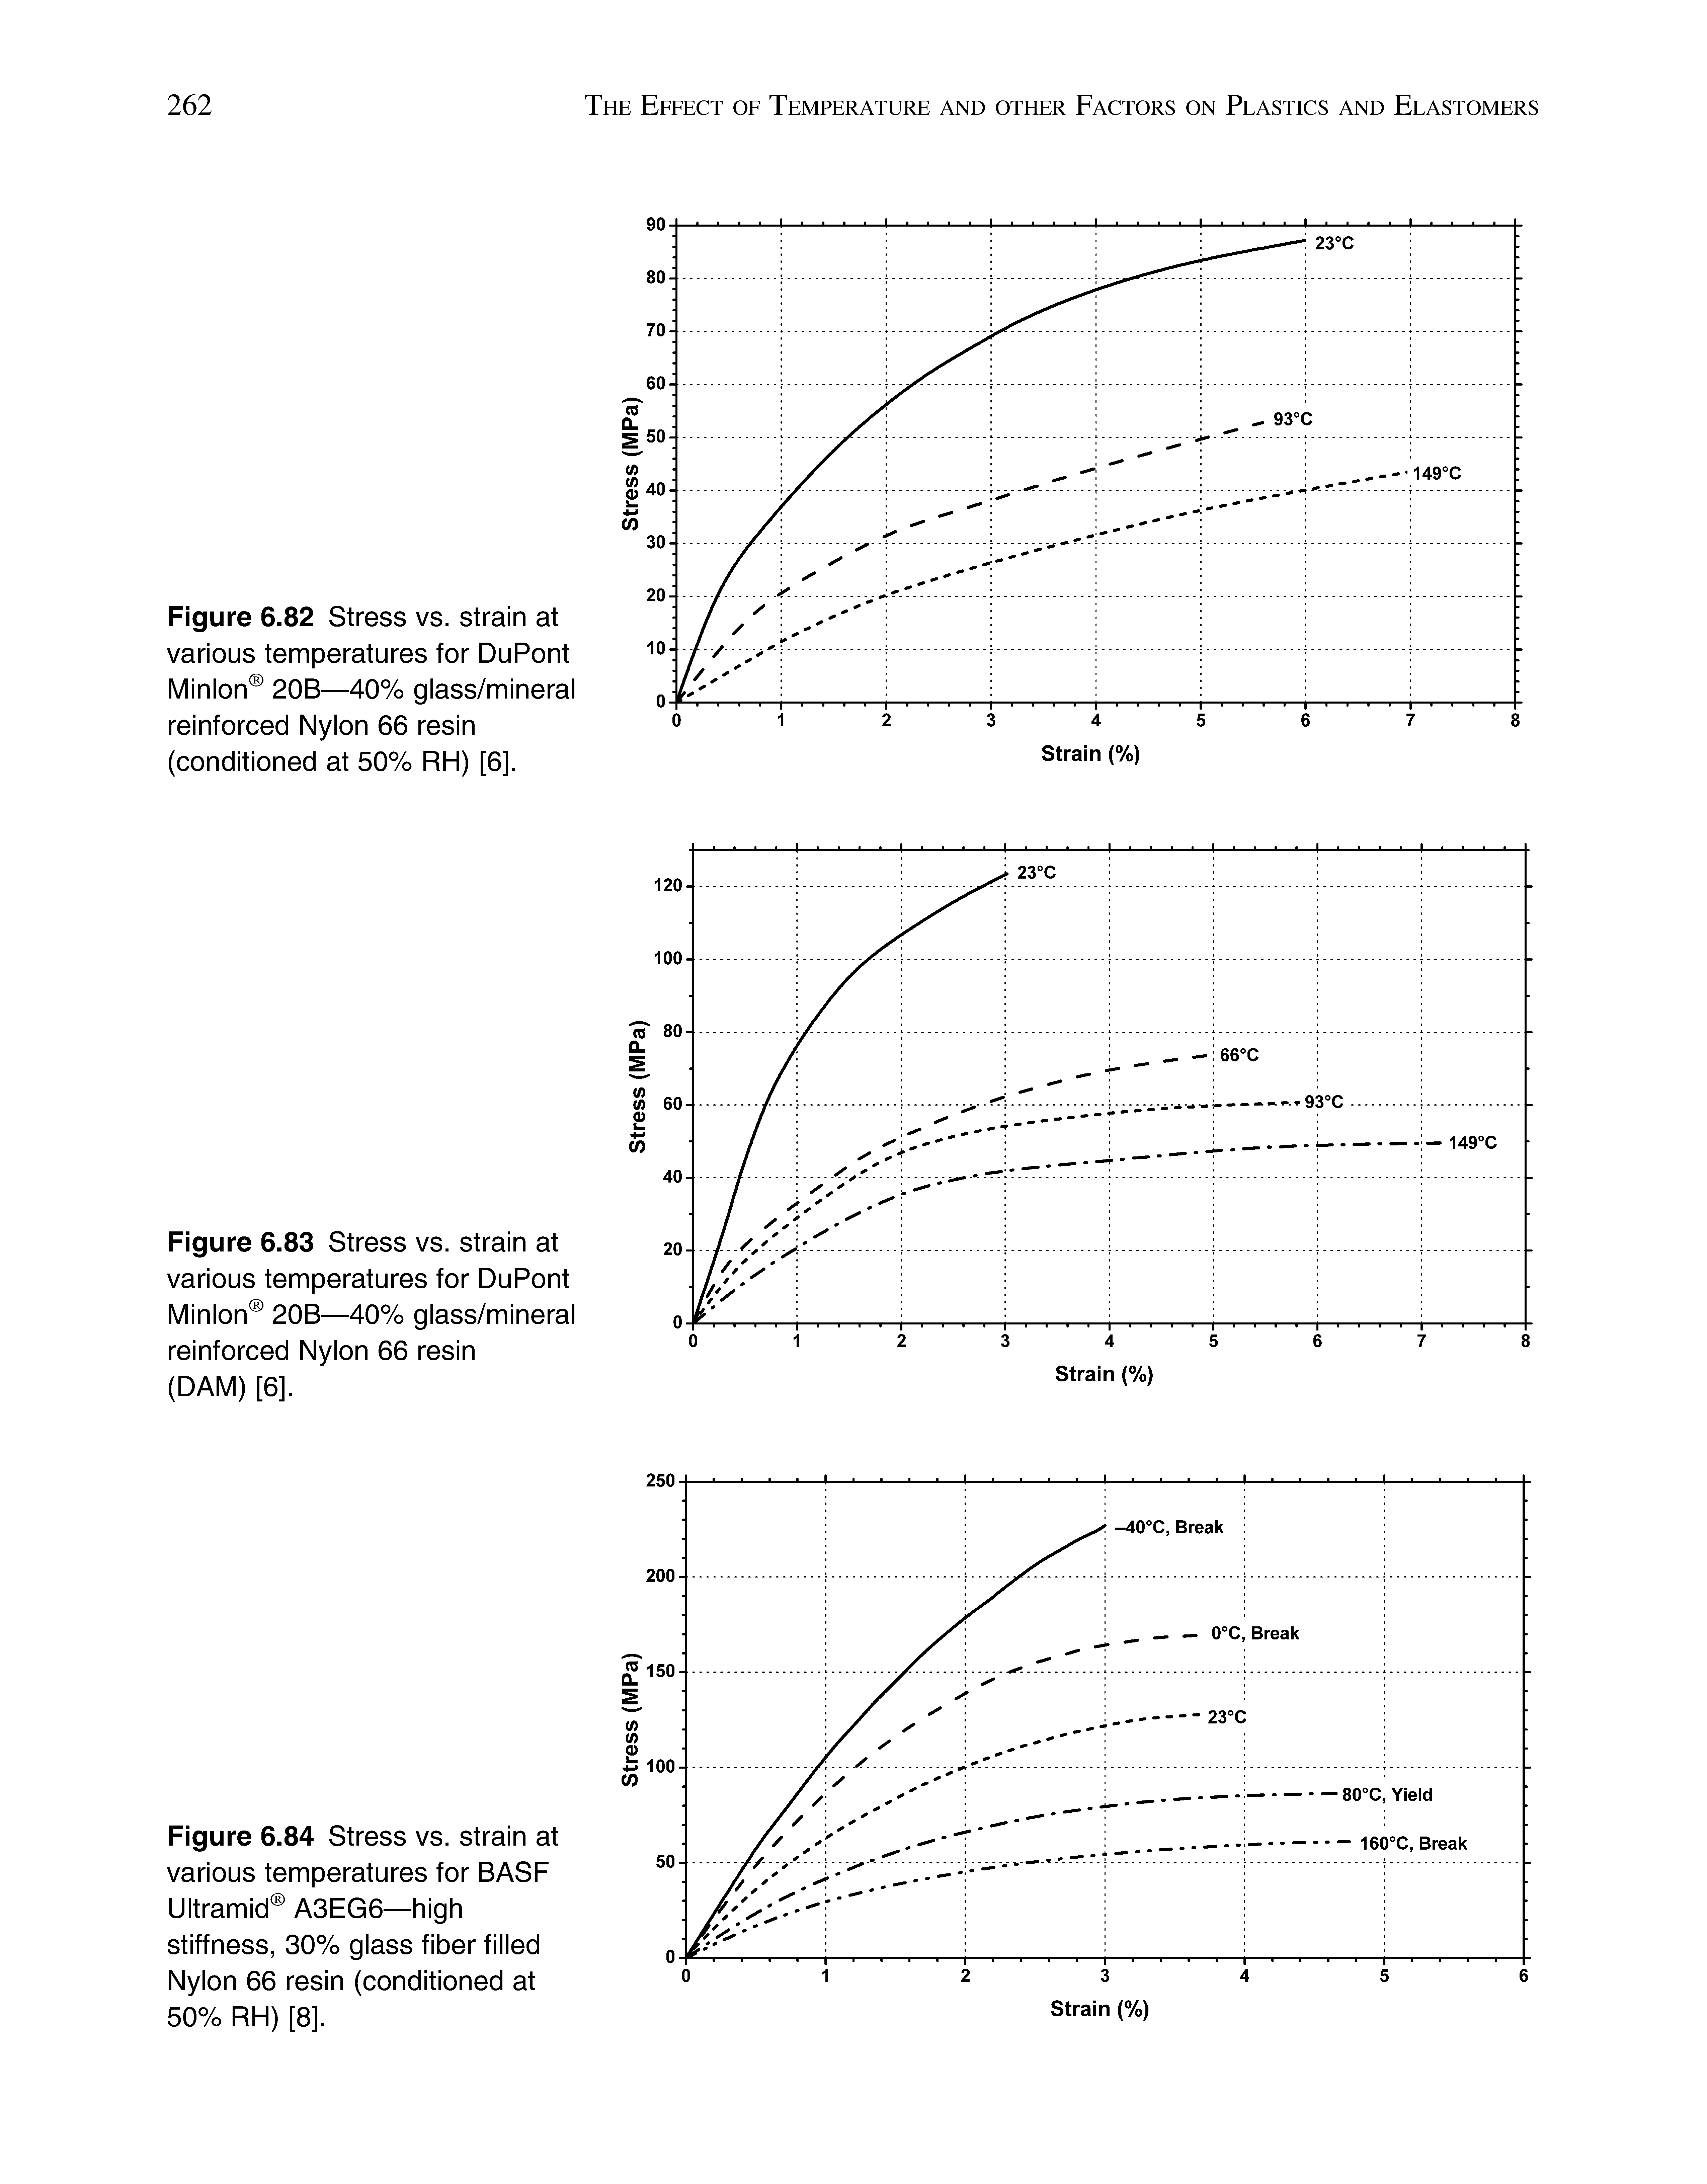 Figure 6.84 Stress vs. strain at various temperatures for BASF Ultramid A3EG6—high stiffness, 30% glass fiber filled Nylon 66 resin (conditioned at 50% RH) [8].